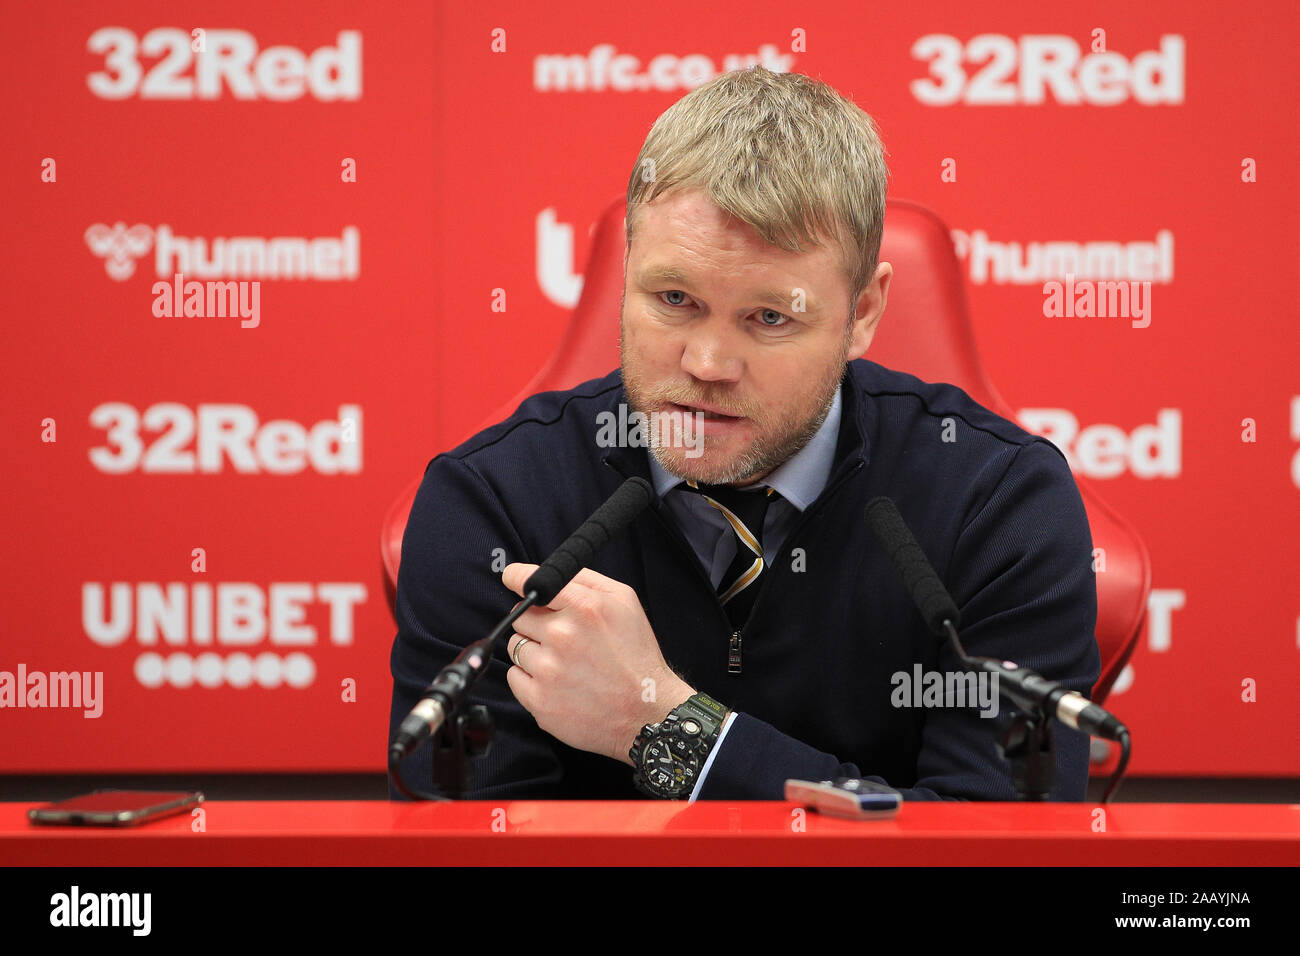 Middlesbrough, UK. 24 November 2019. Hull City manager Grant McCann speaks to the press after the Sky Bet Championship match between Middlesbrough and Hull City at the Riverside Stadium, Middlesbrough on Sunday 24th November 2019. Stock Photo